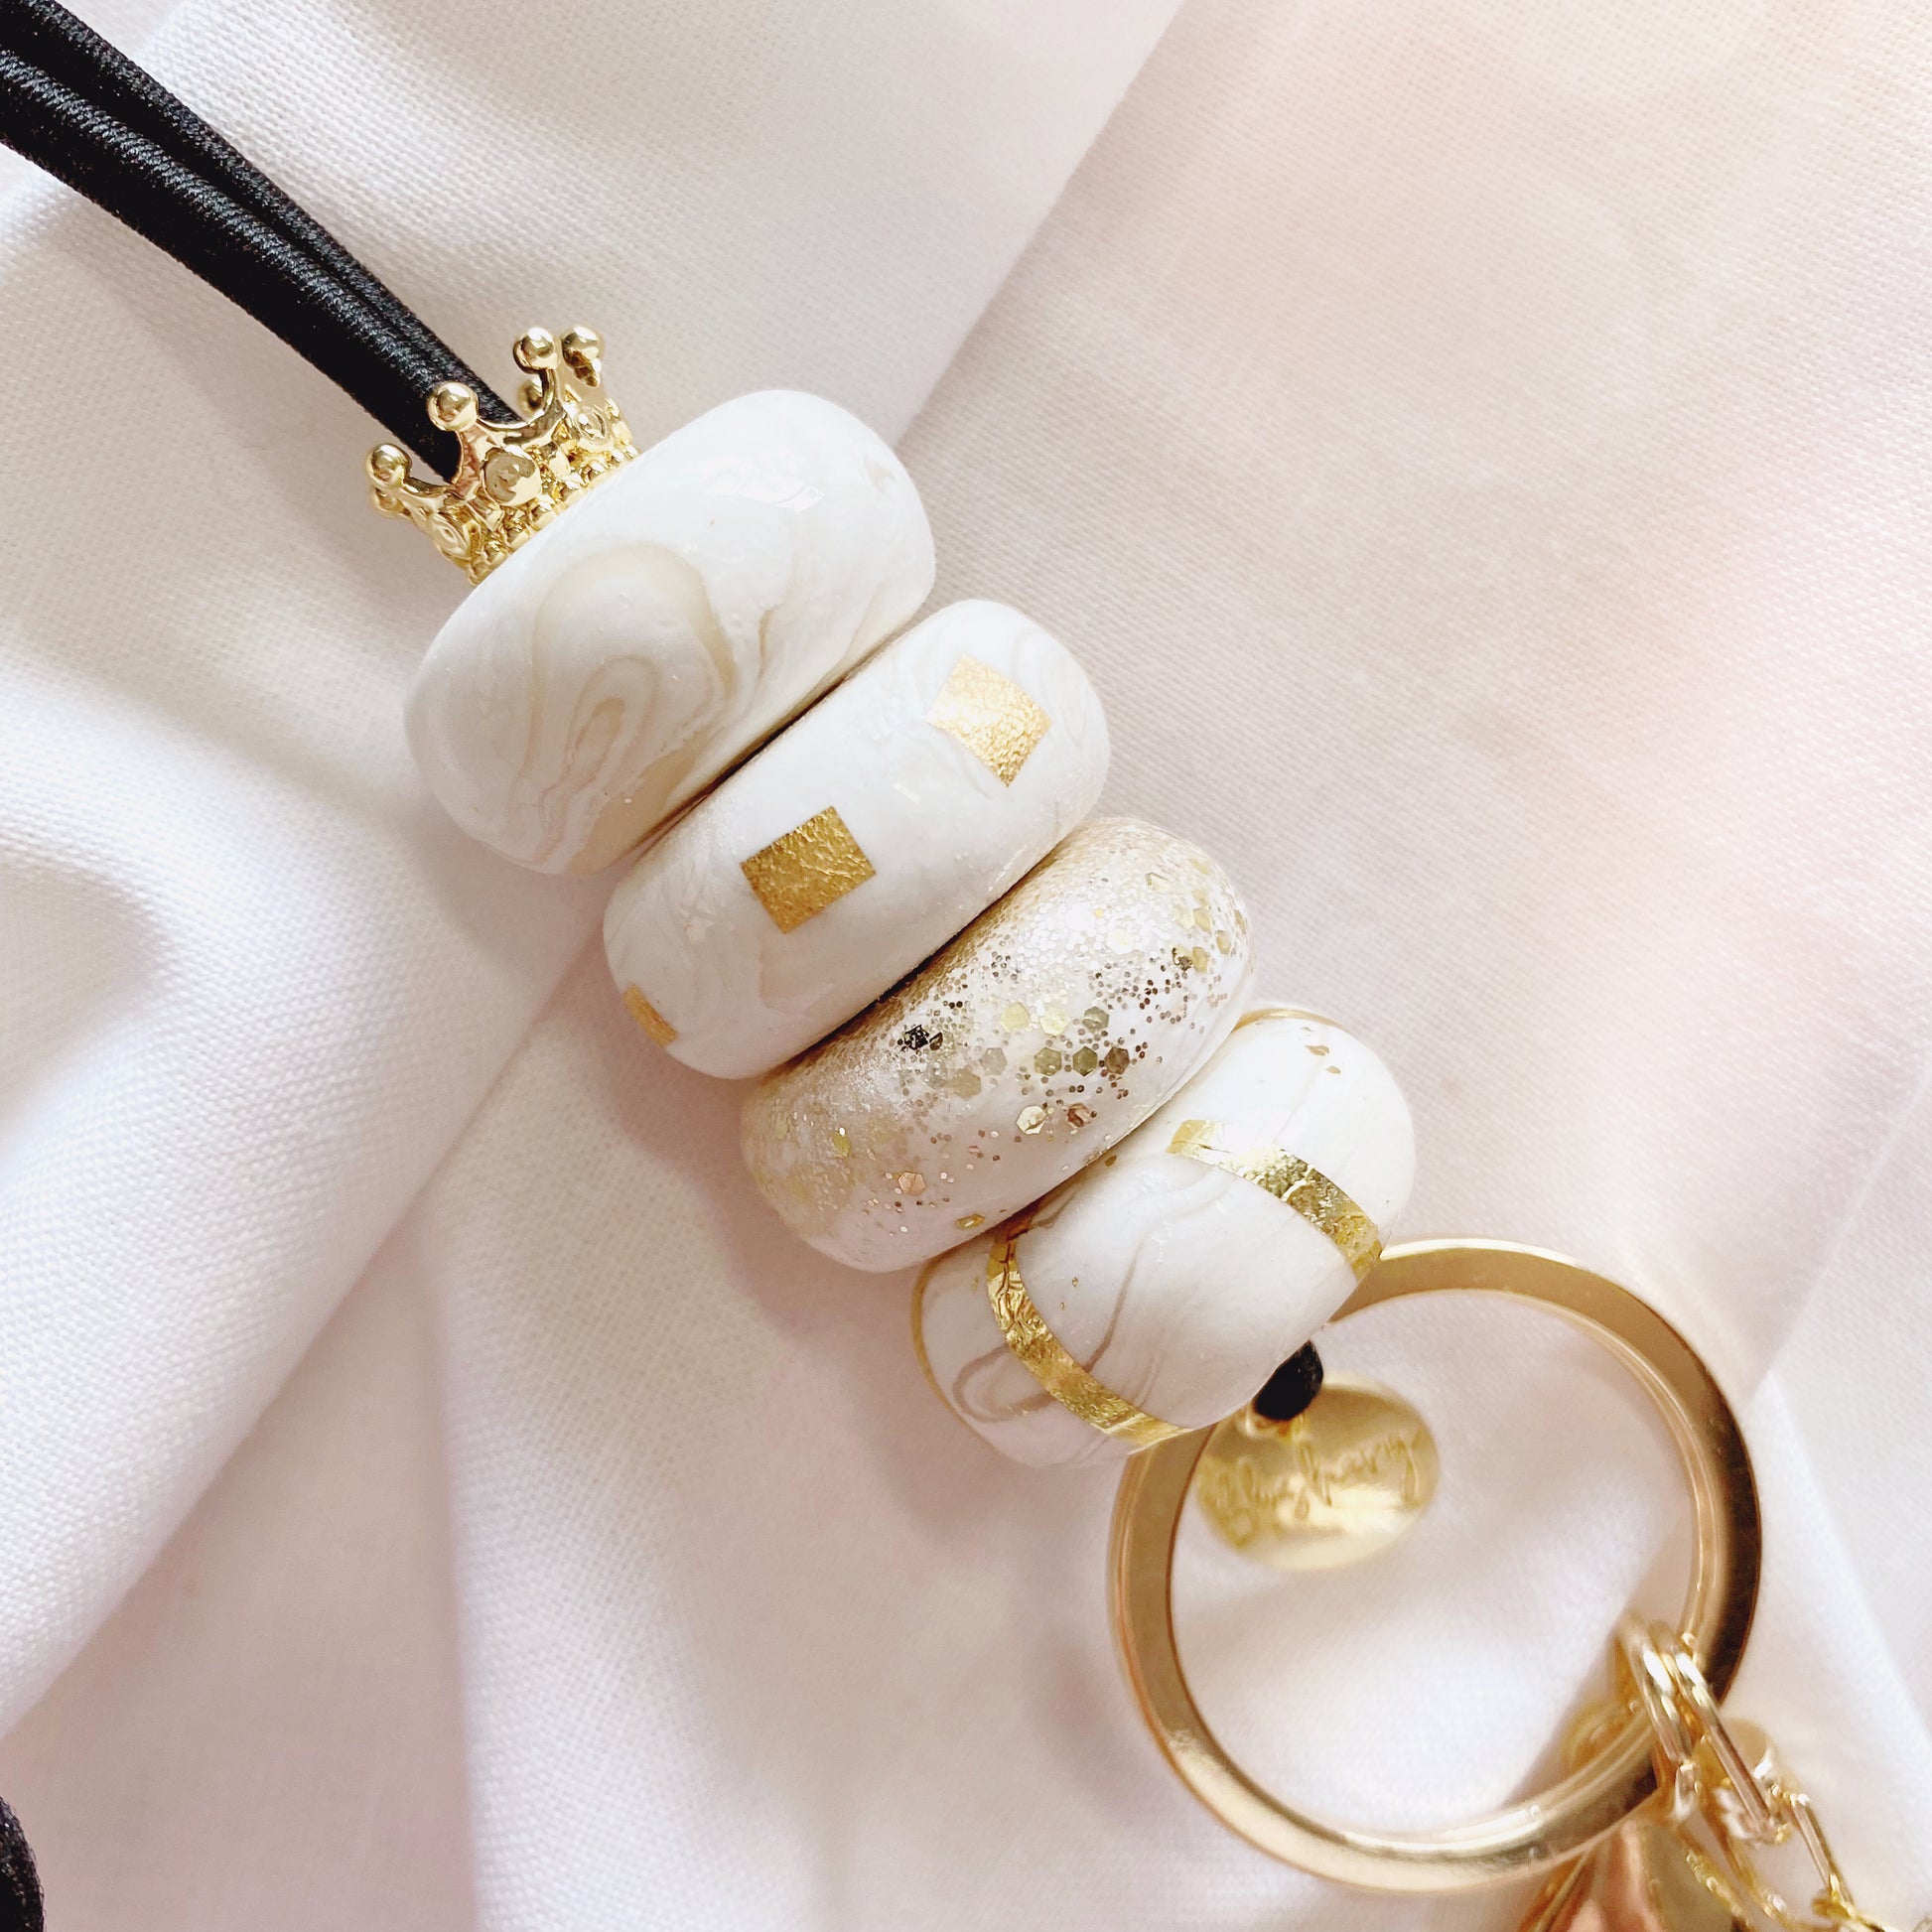 handmade beautiful elegant marble beads with gold leaf and crown charm